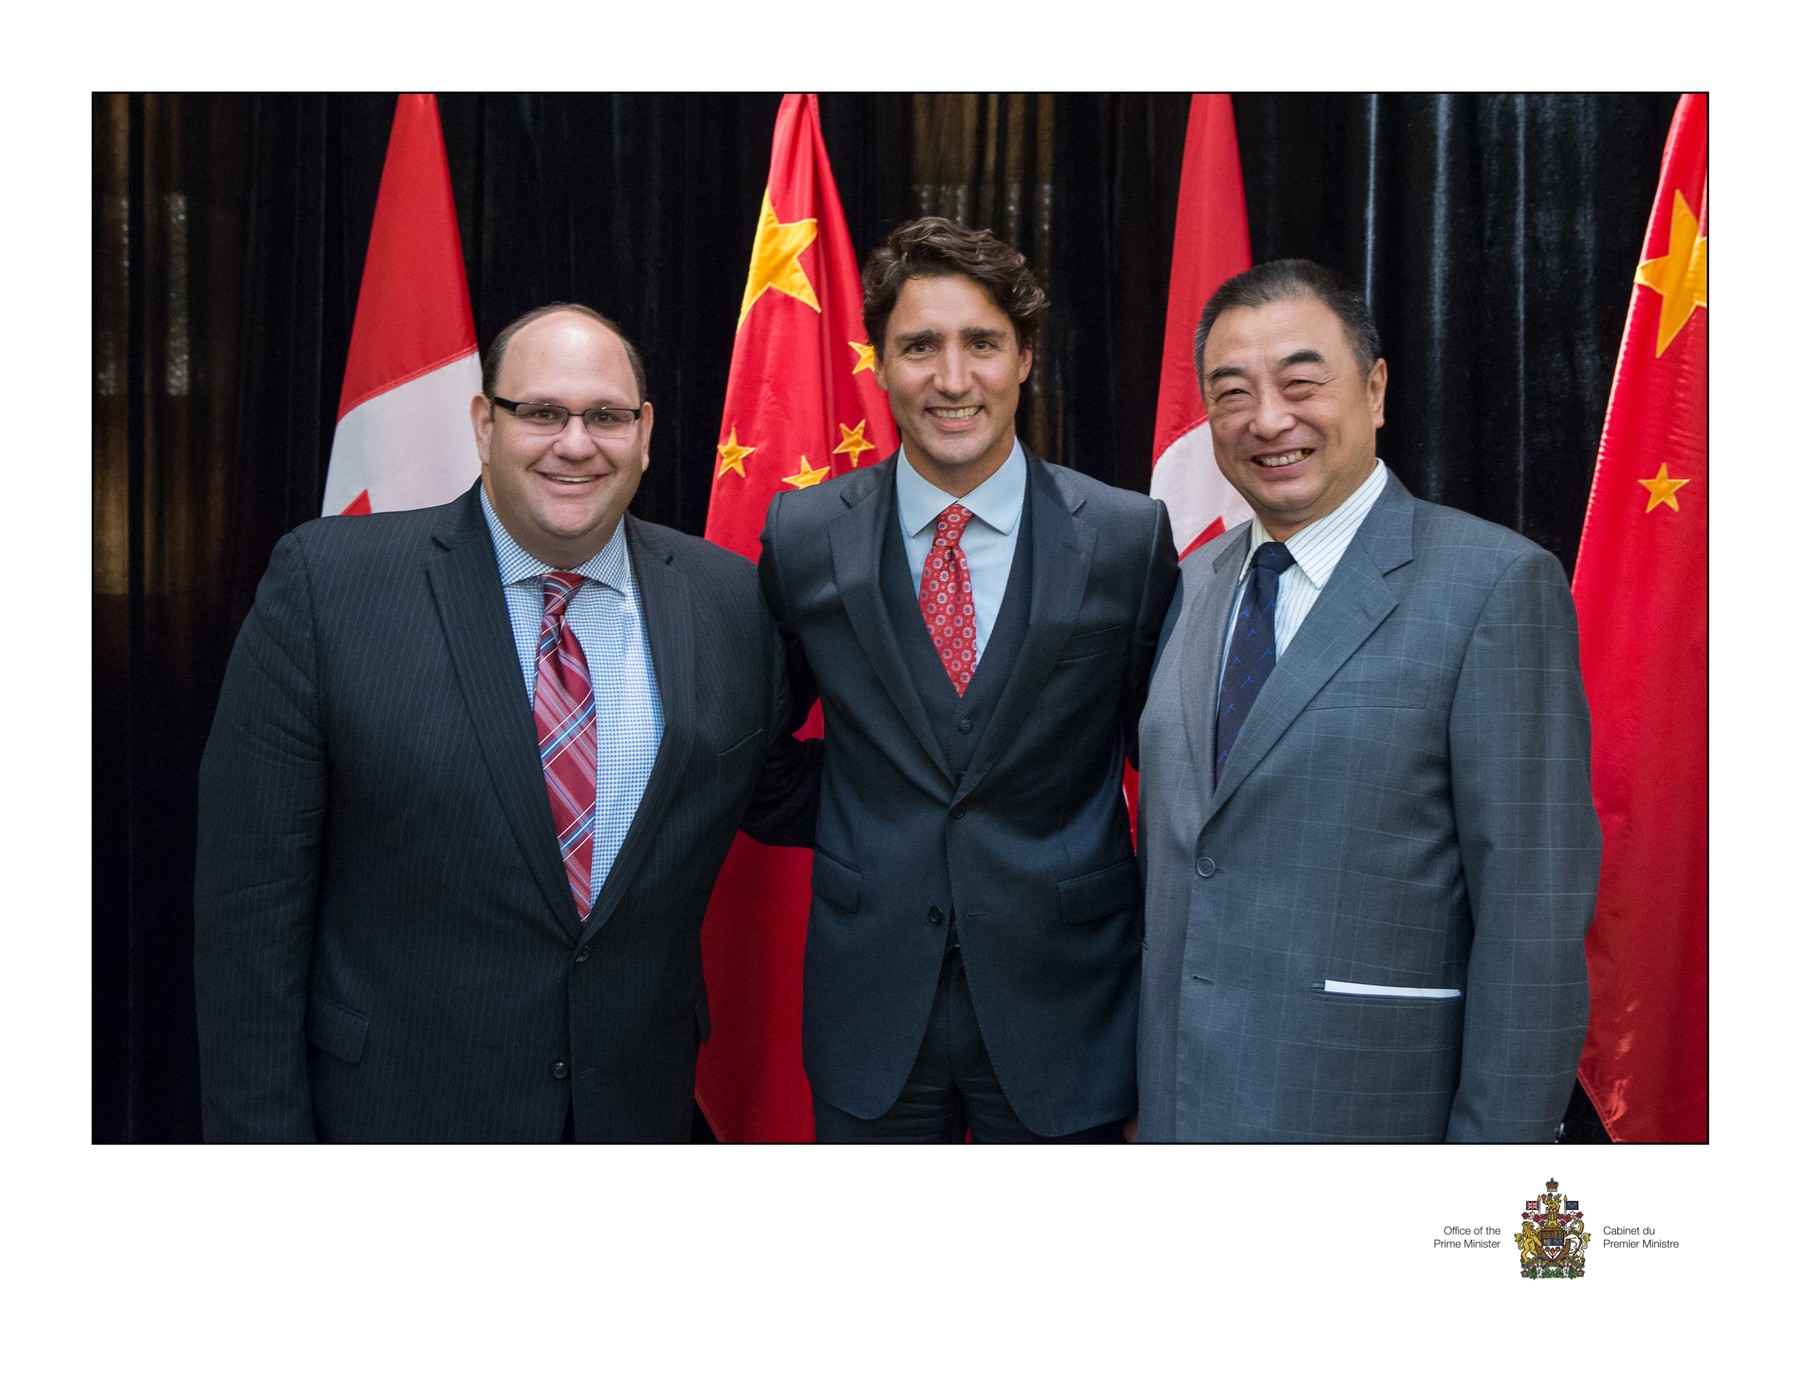 Left-to-right-Michael-Rubinoff-Associate-Dean-at-Sheridan-College-Prime-Minister-Justin-Trudeau-Yang-Shaolin-General-Manager-of-the-Shanghai-Dramatic-Arts-Centre.jpg | Left-to-right-Michael-Rubinoff-Associate-Dean-at-Sheridan-College-Prime-Minister-Justin-Trudeau-Yang-Shaolin-General-Manager-of-the-Shanghai-Dramatic-Arts-Centre.jpg | Government of Canada